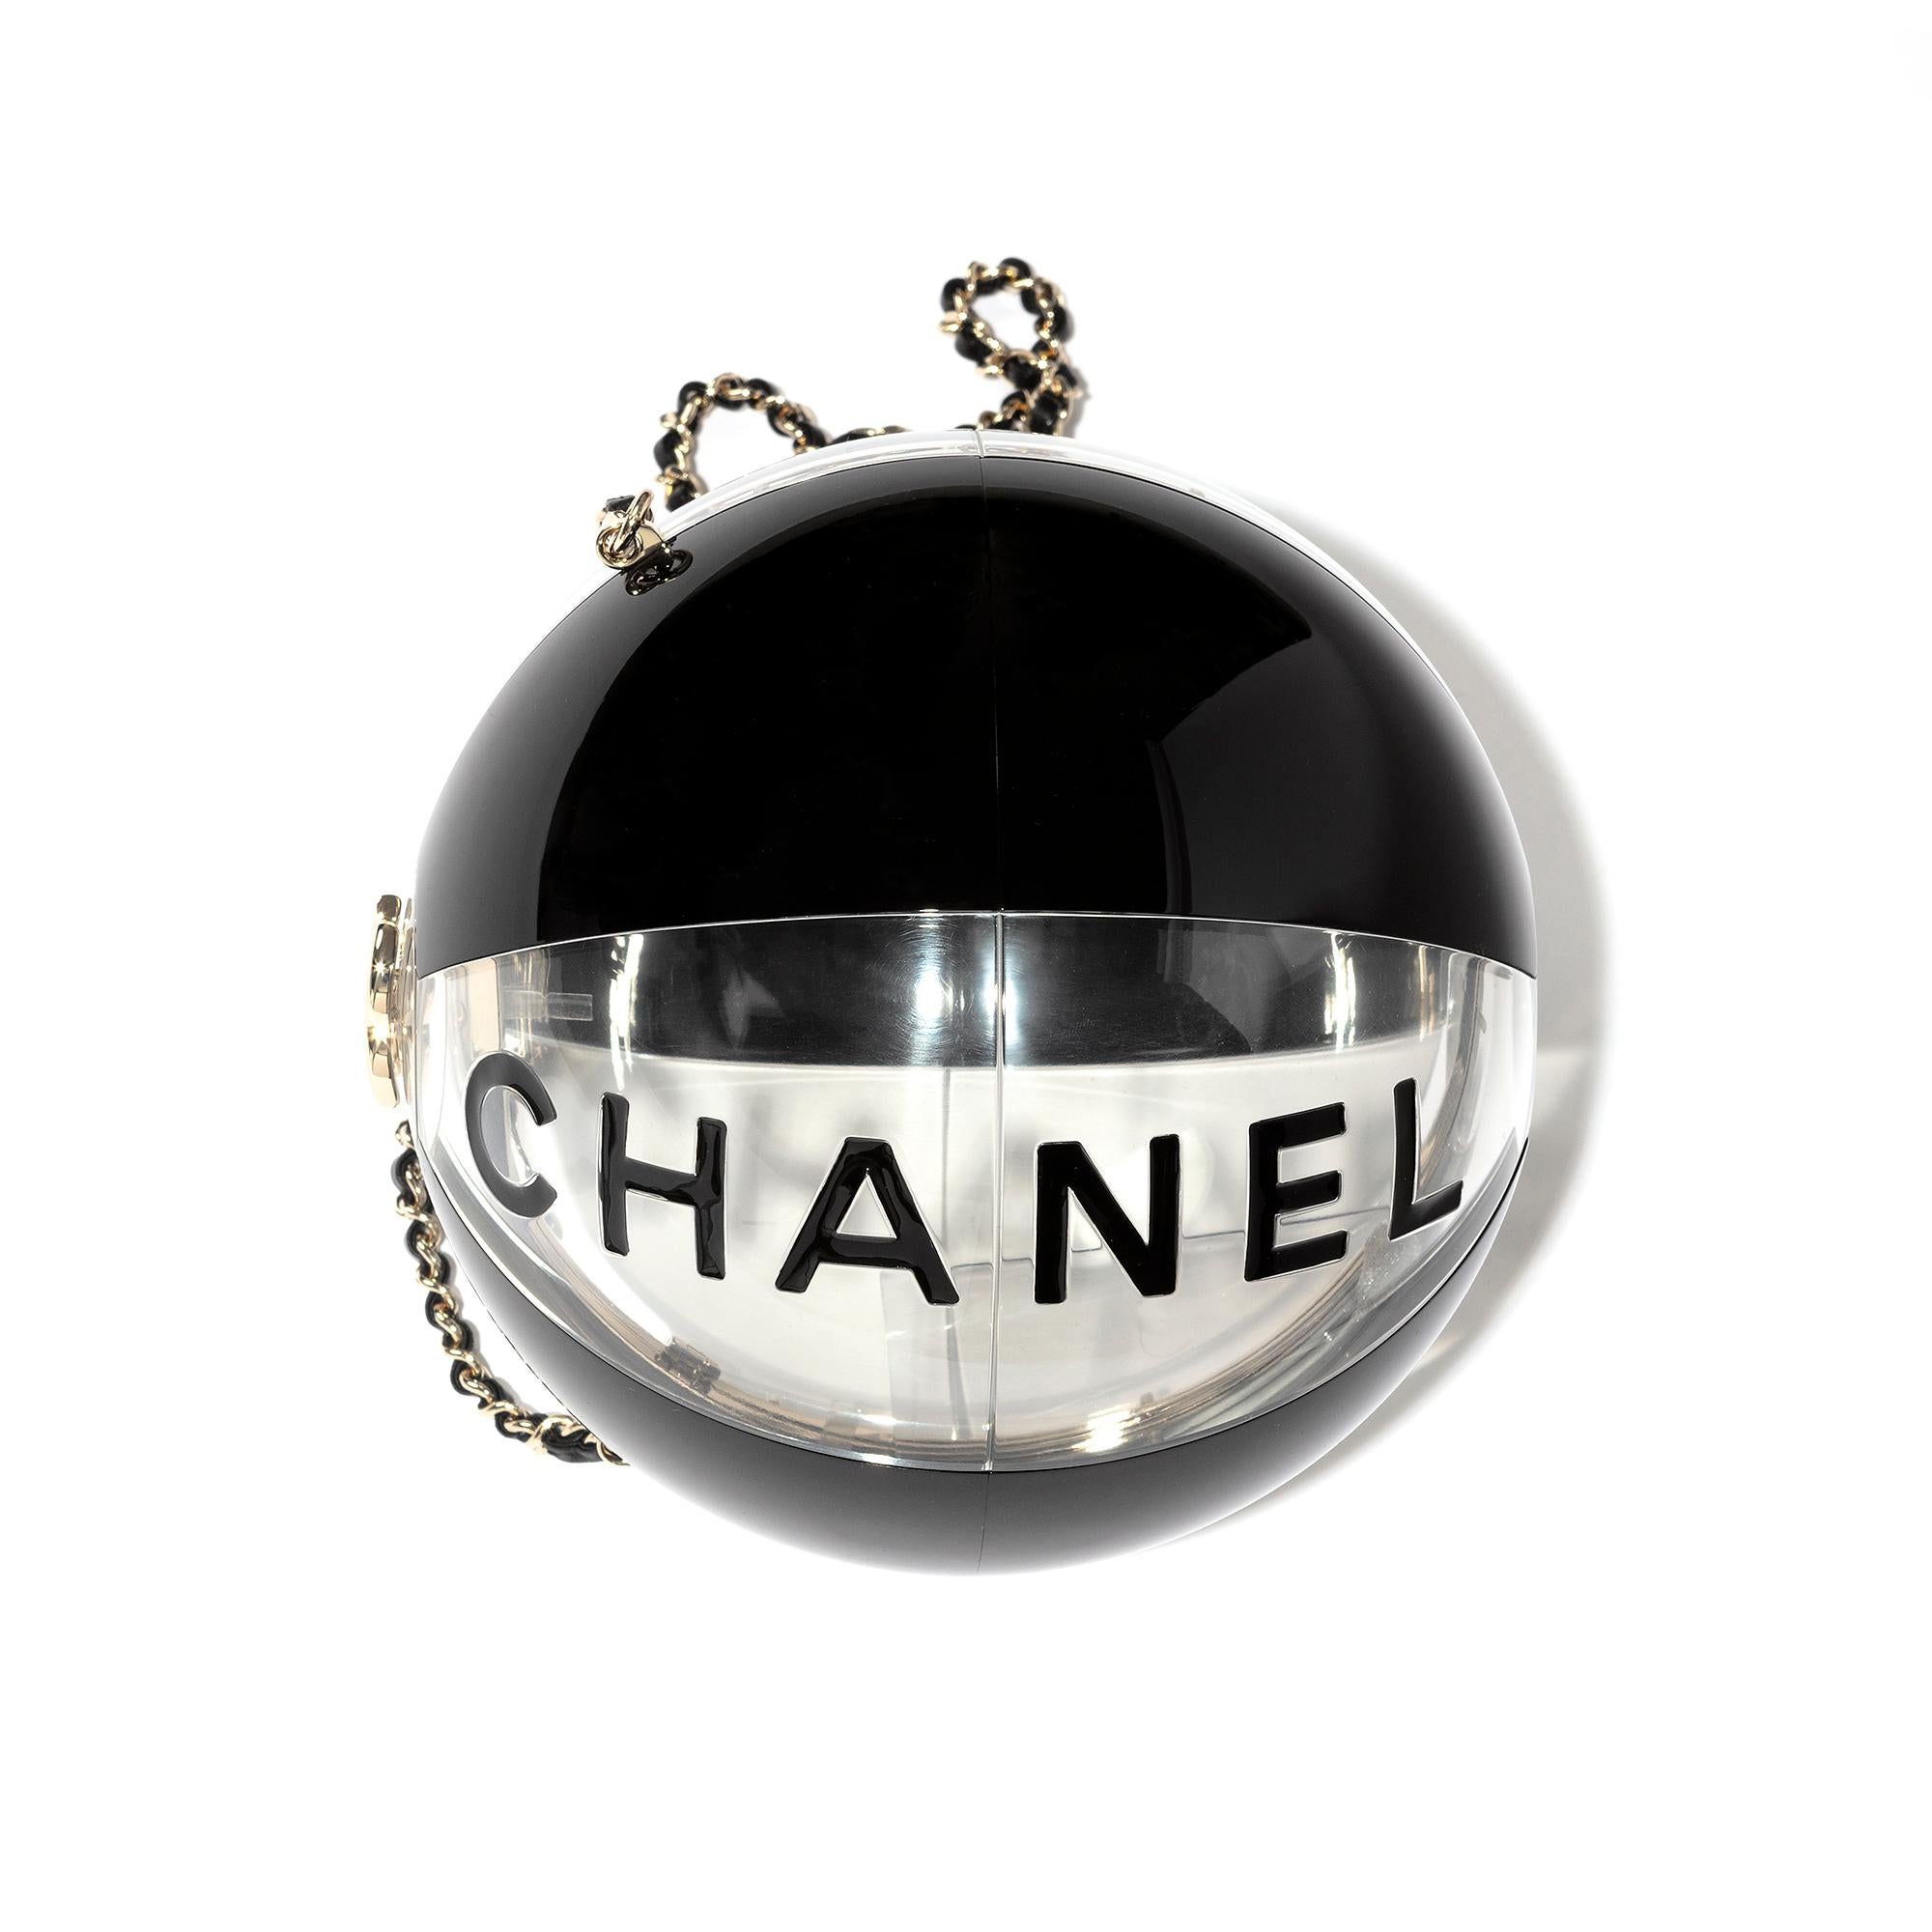 Chanel Coco Beach Ball Minaudière Clutch Bag 2019 In New Condition For Sale In London, GB